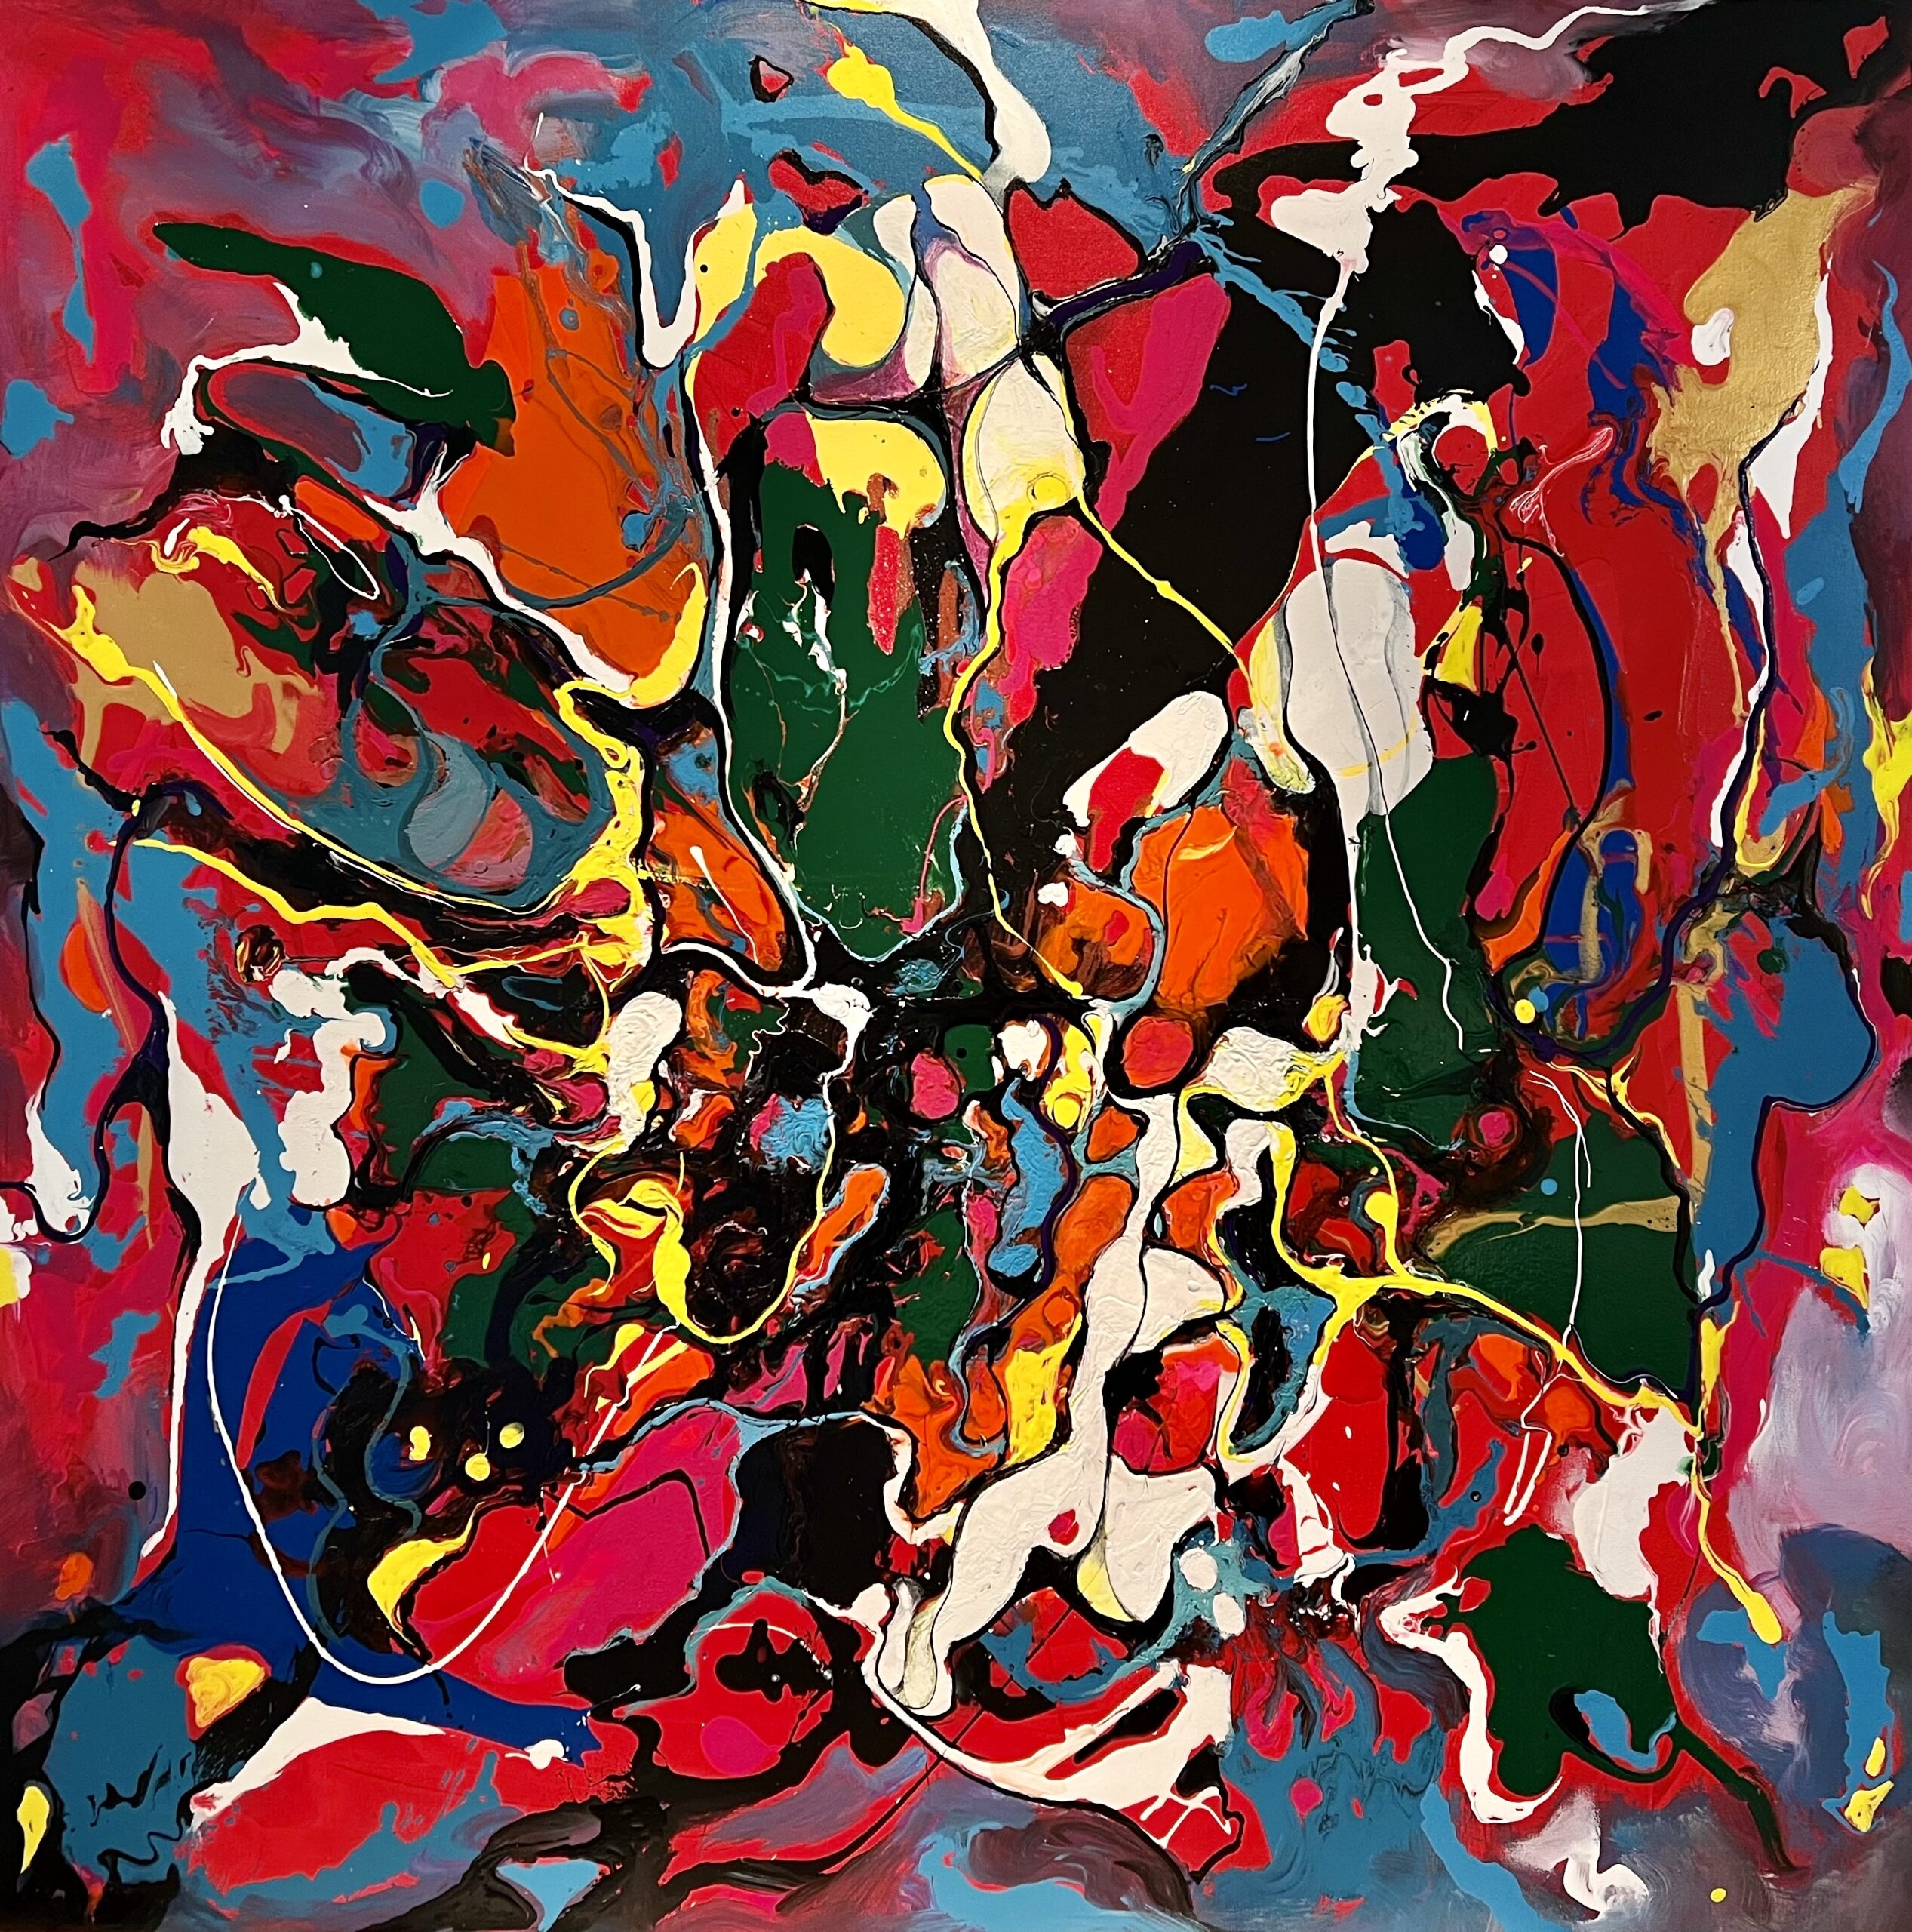 An electrifying abstract painting adorned with large, fluid shapes in a striking palette of reds, purples, pinks, and yellows. The dynamic movements of the colorful forms create a visually stimulating composition, radiating energy and vitality. The interplay of vibrant hues adds a sense of drama and excitement to this captivating artwork.